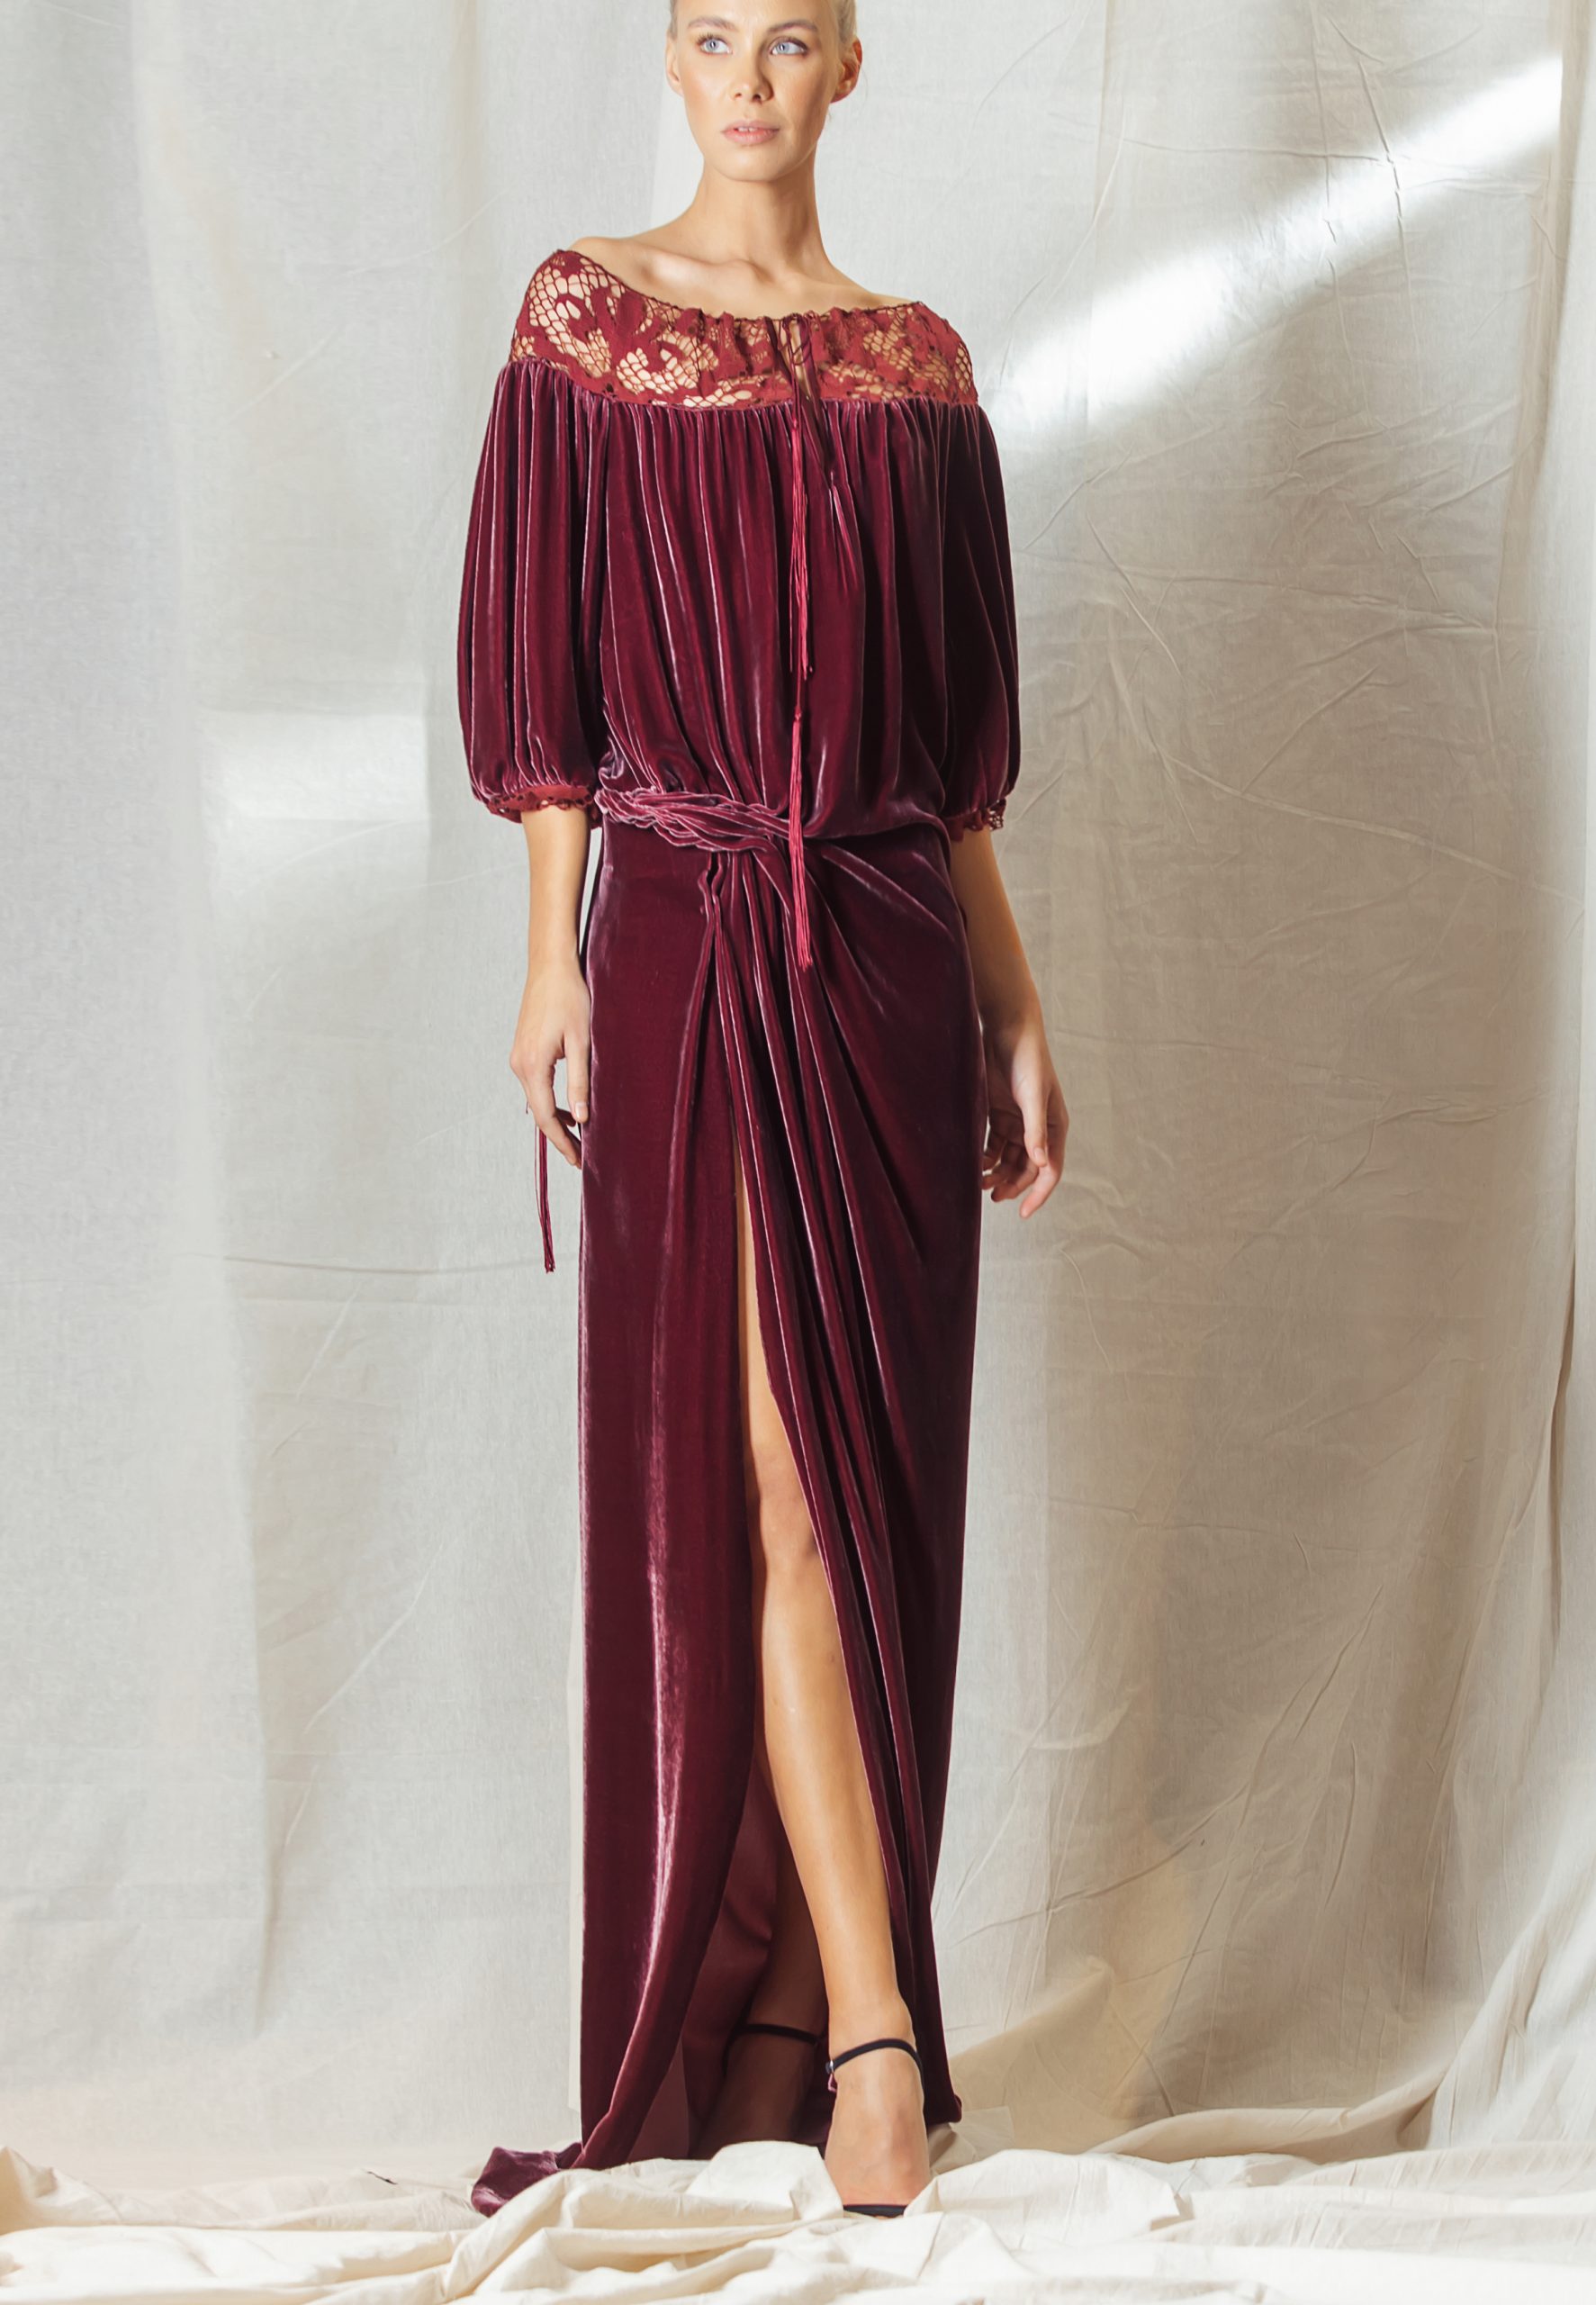 Burgundy Velour dress with lace